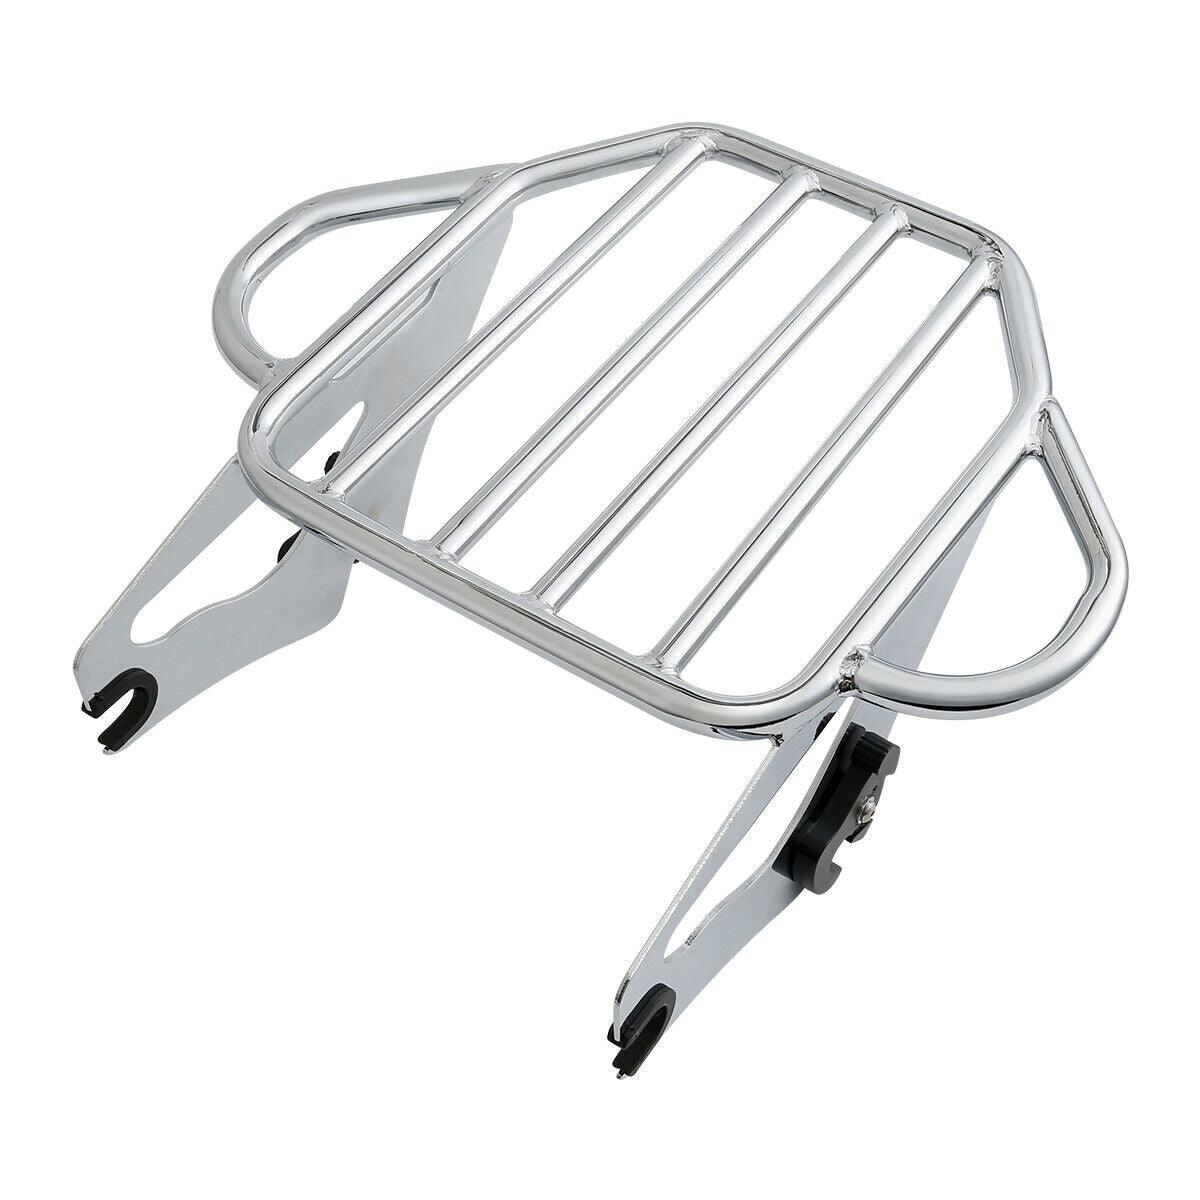 2-Up Mount Luggage Rack For Harley Tour Pak Touring Street Electra Glide 2009-22 - Moto Life Products